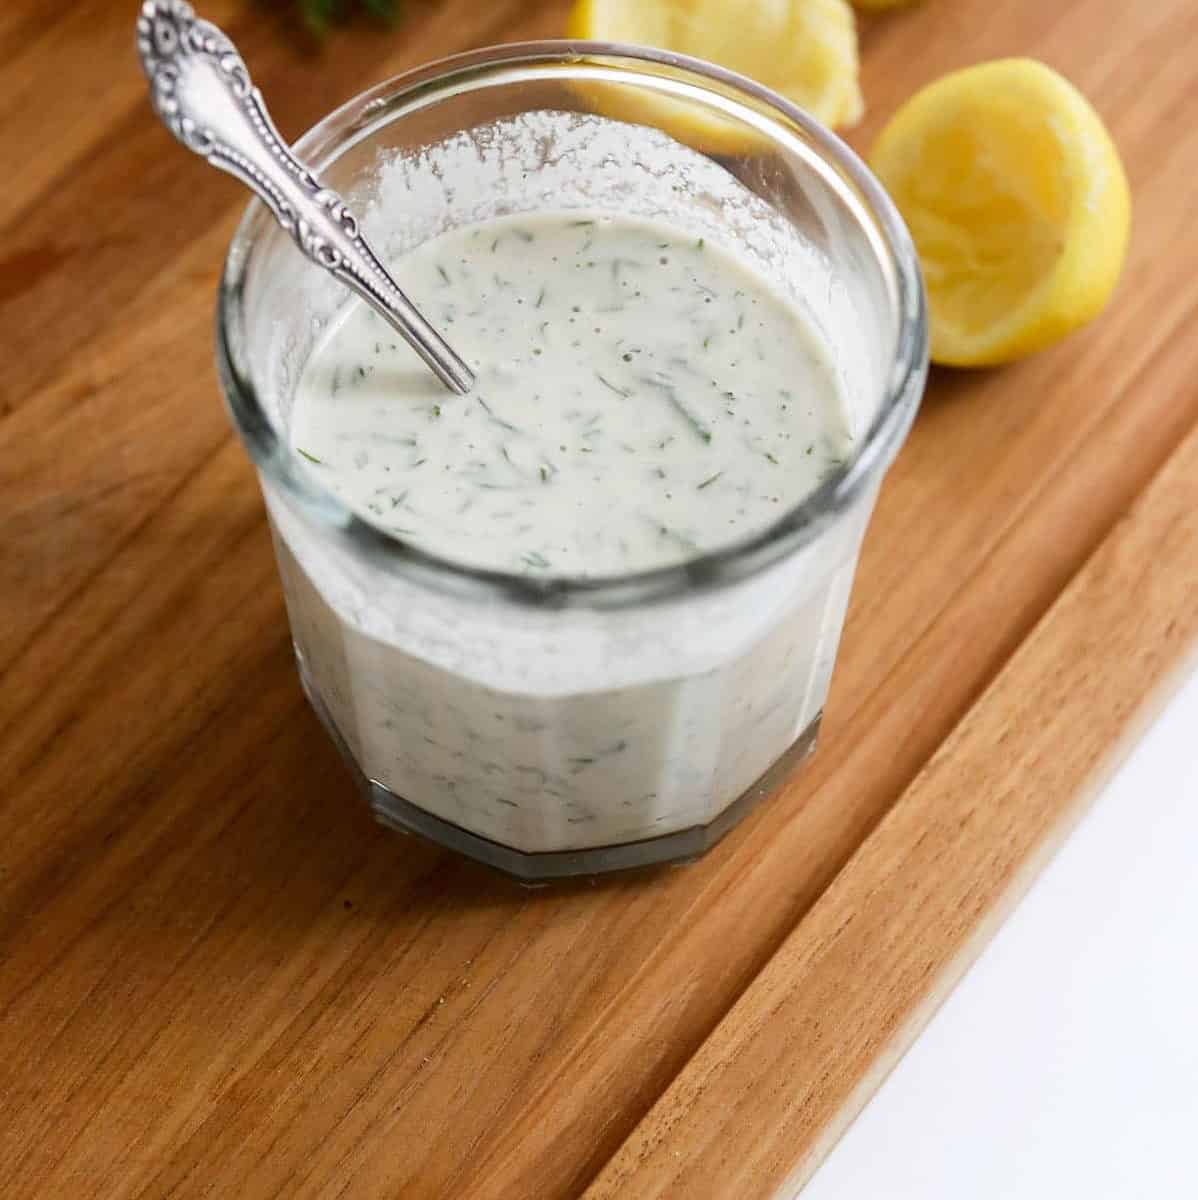  Tahini and dill are the ultimate flavor duo in this scrumptious recipe.